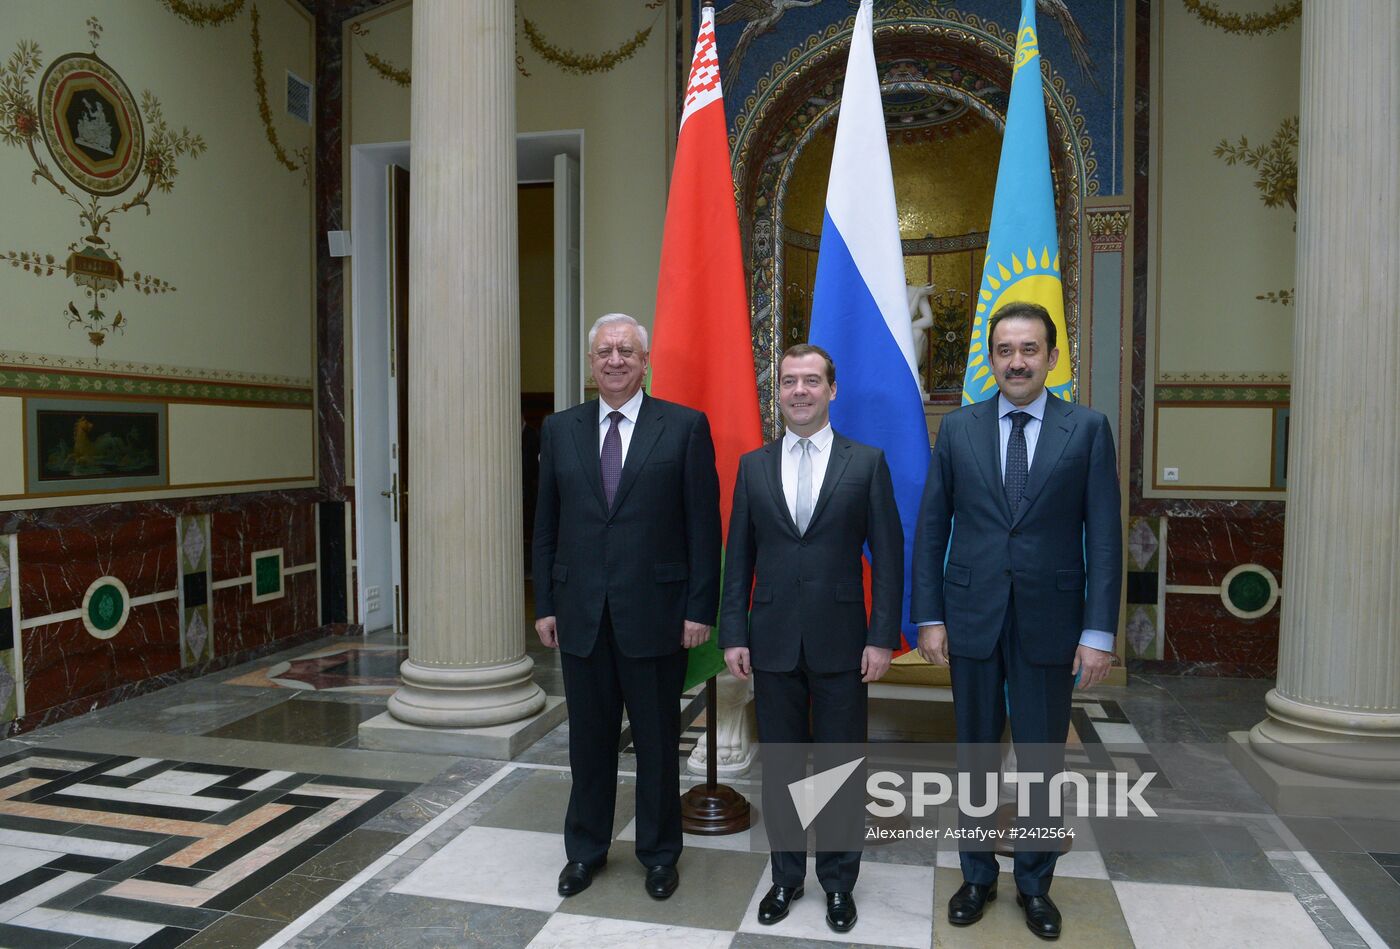 Trilateral talks between the Prime Ministers of Russia, Belarus and Kazakhstan